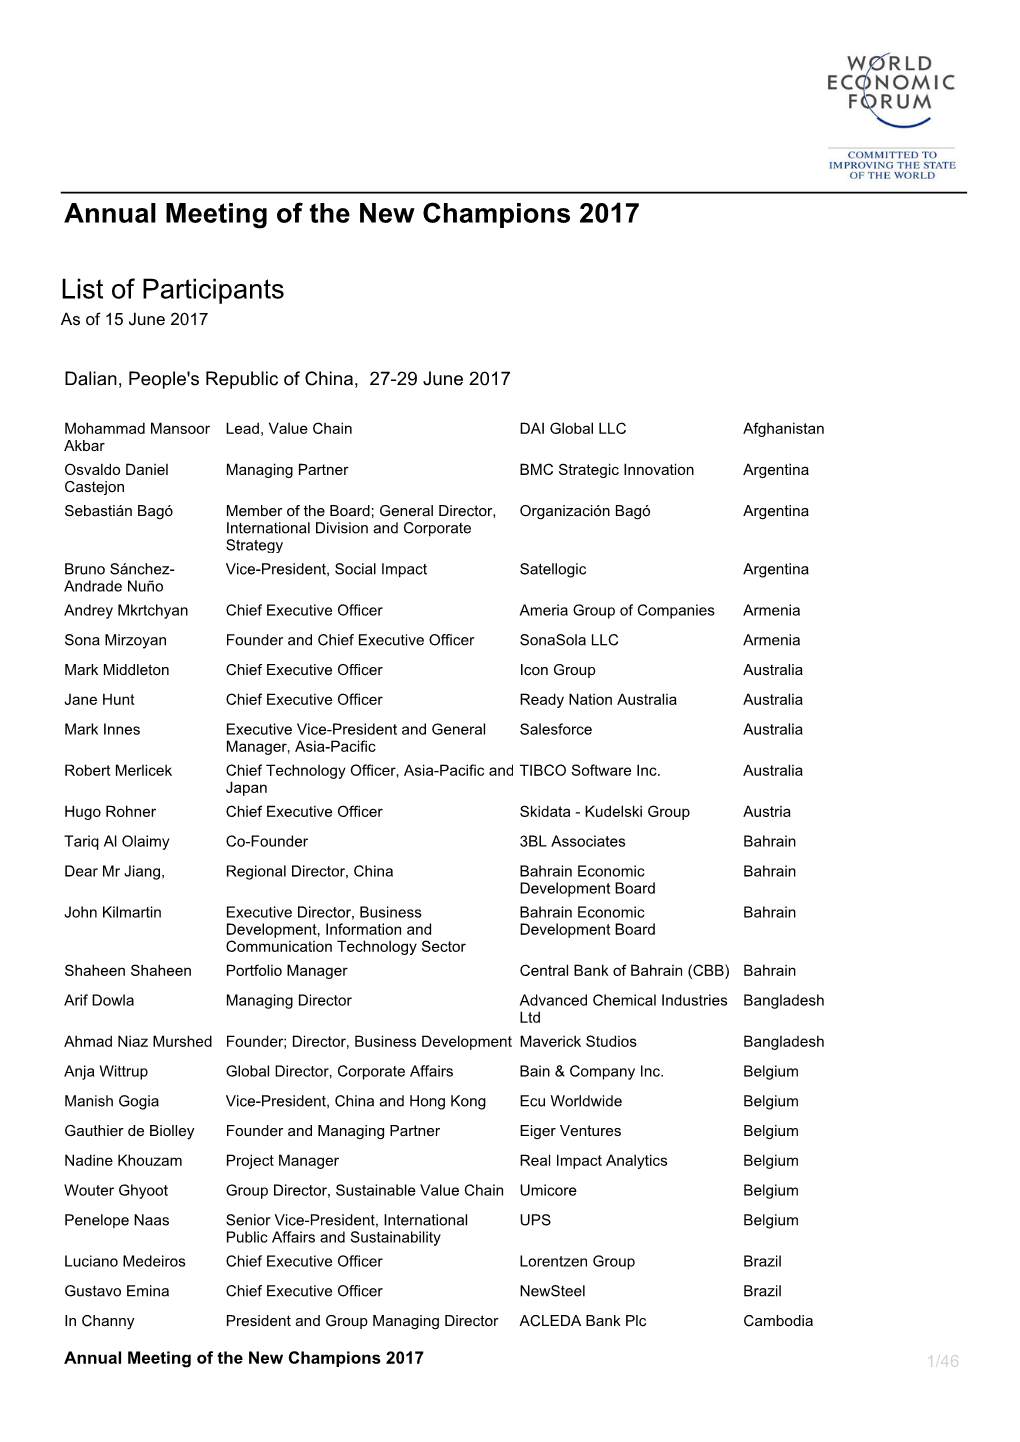 List of Participants As of 15 June 2017